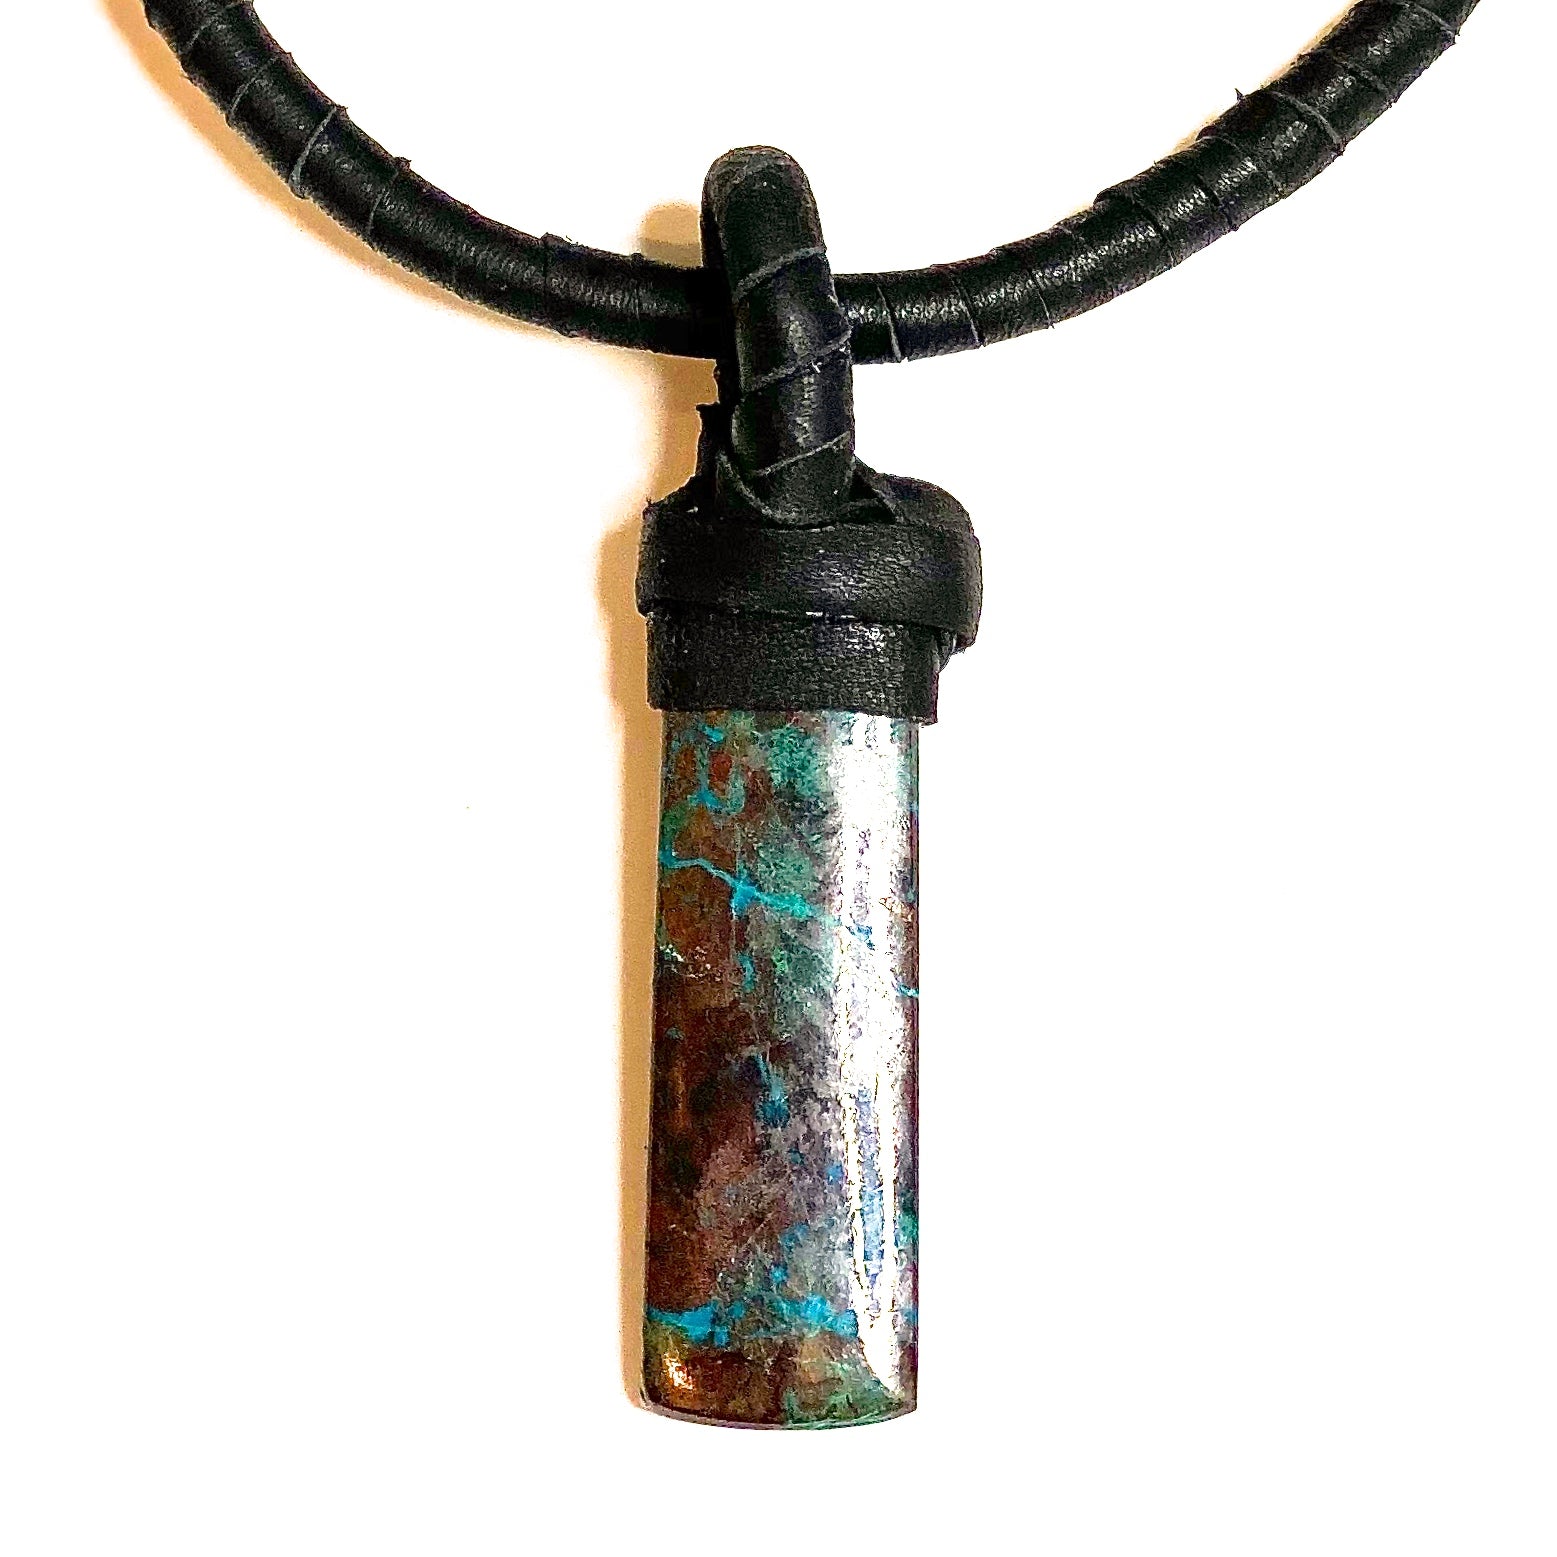 Deerskin necklace with Parrot Wing Chrysocolla stone by NYET Jewelry.